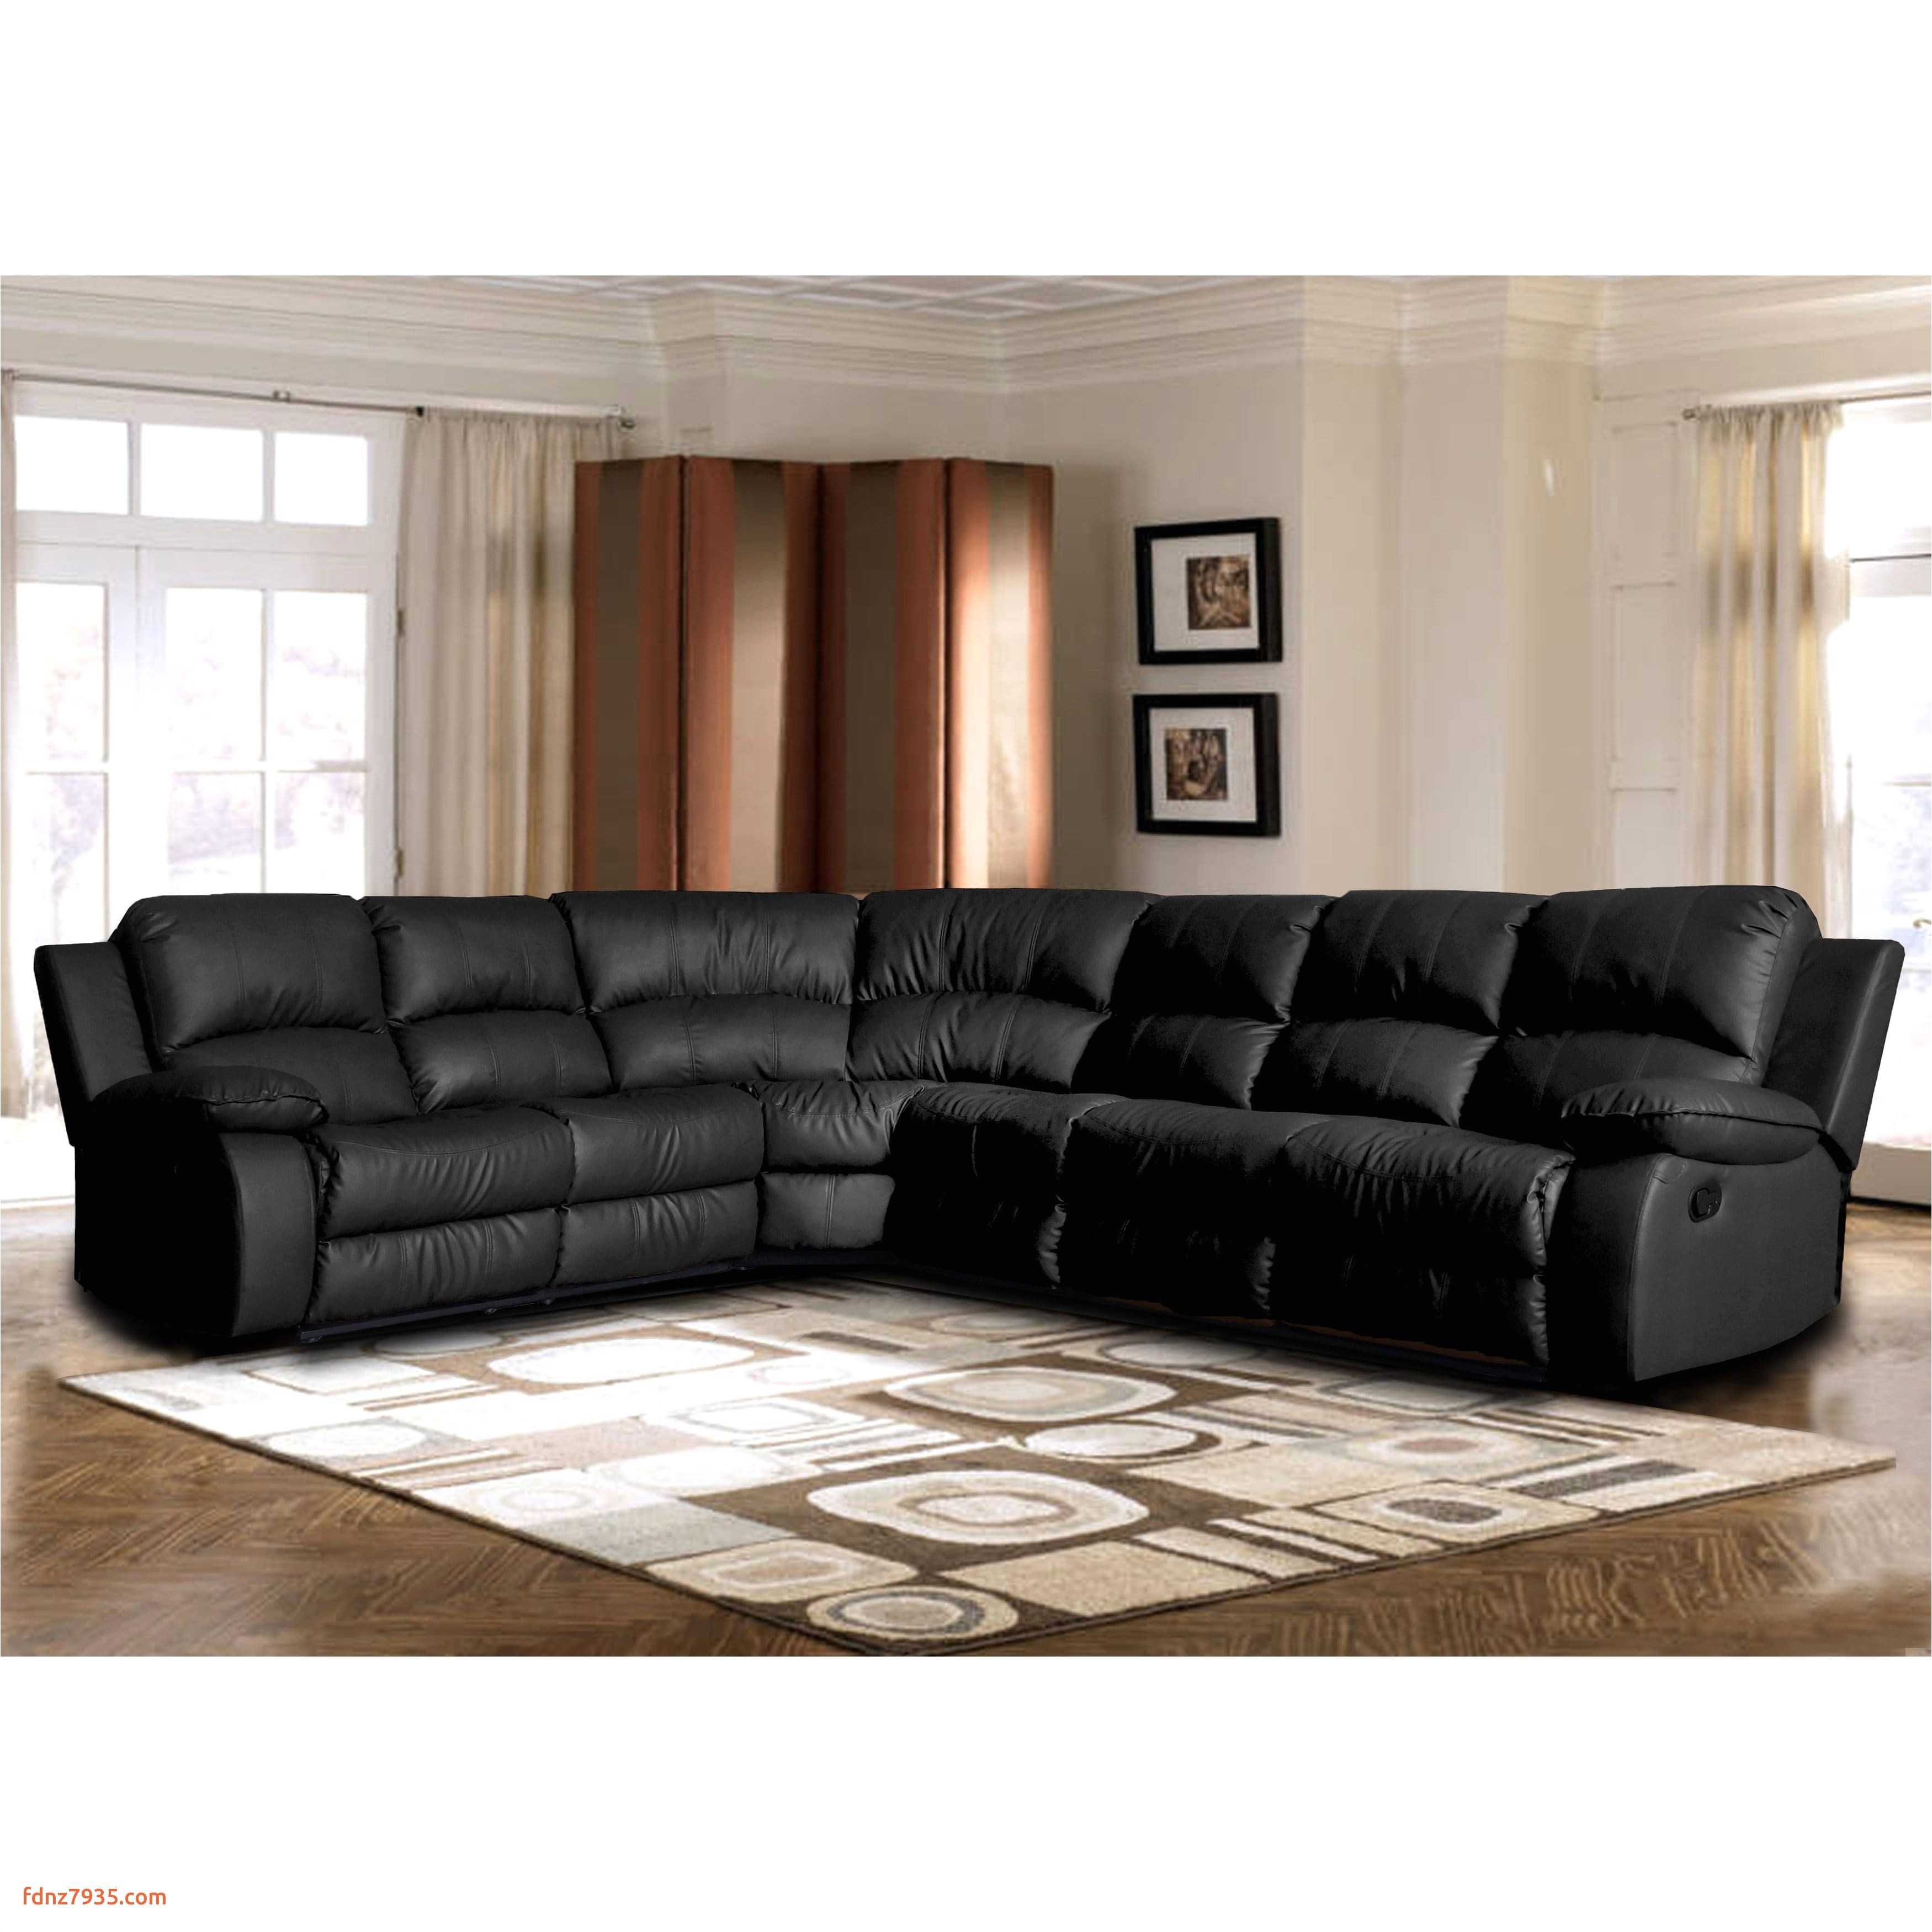 classic oversize and overstuffed corner bonded leather sectional with 2 reclining seats free shipping today overstock